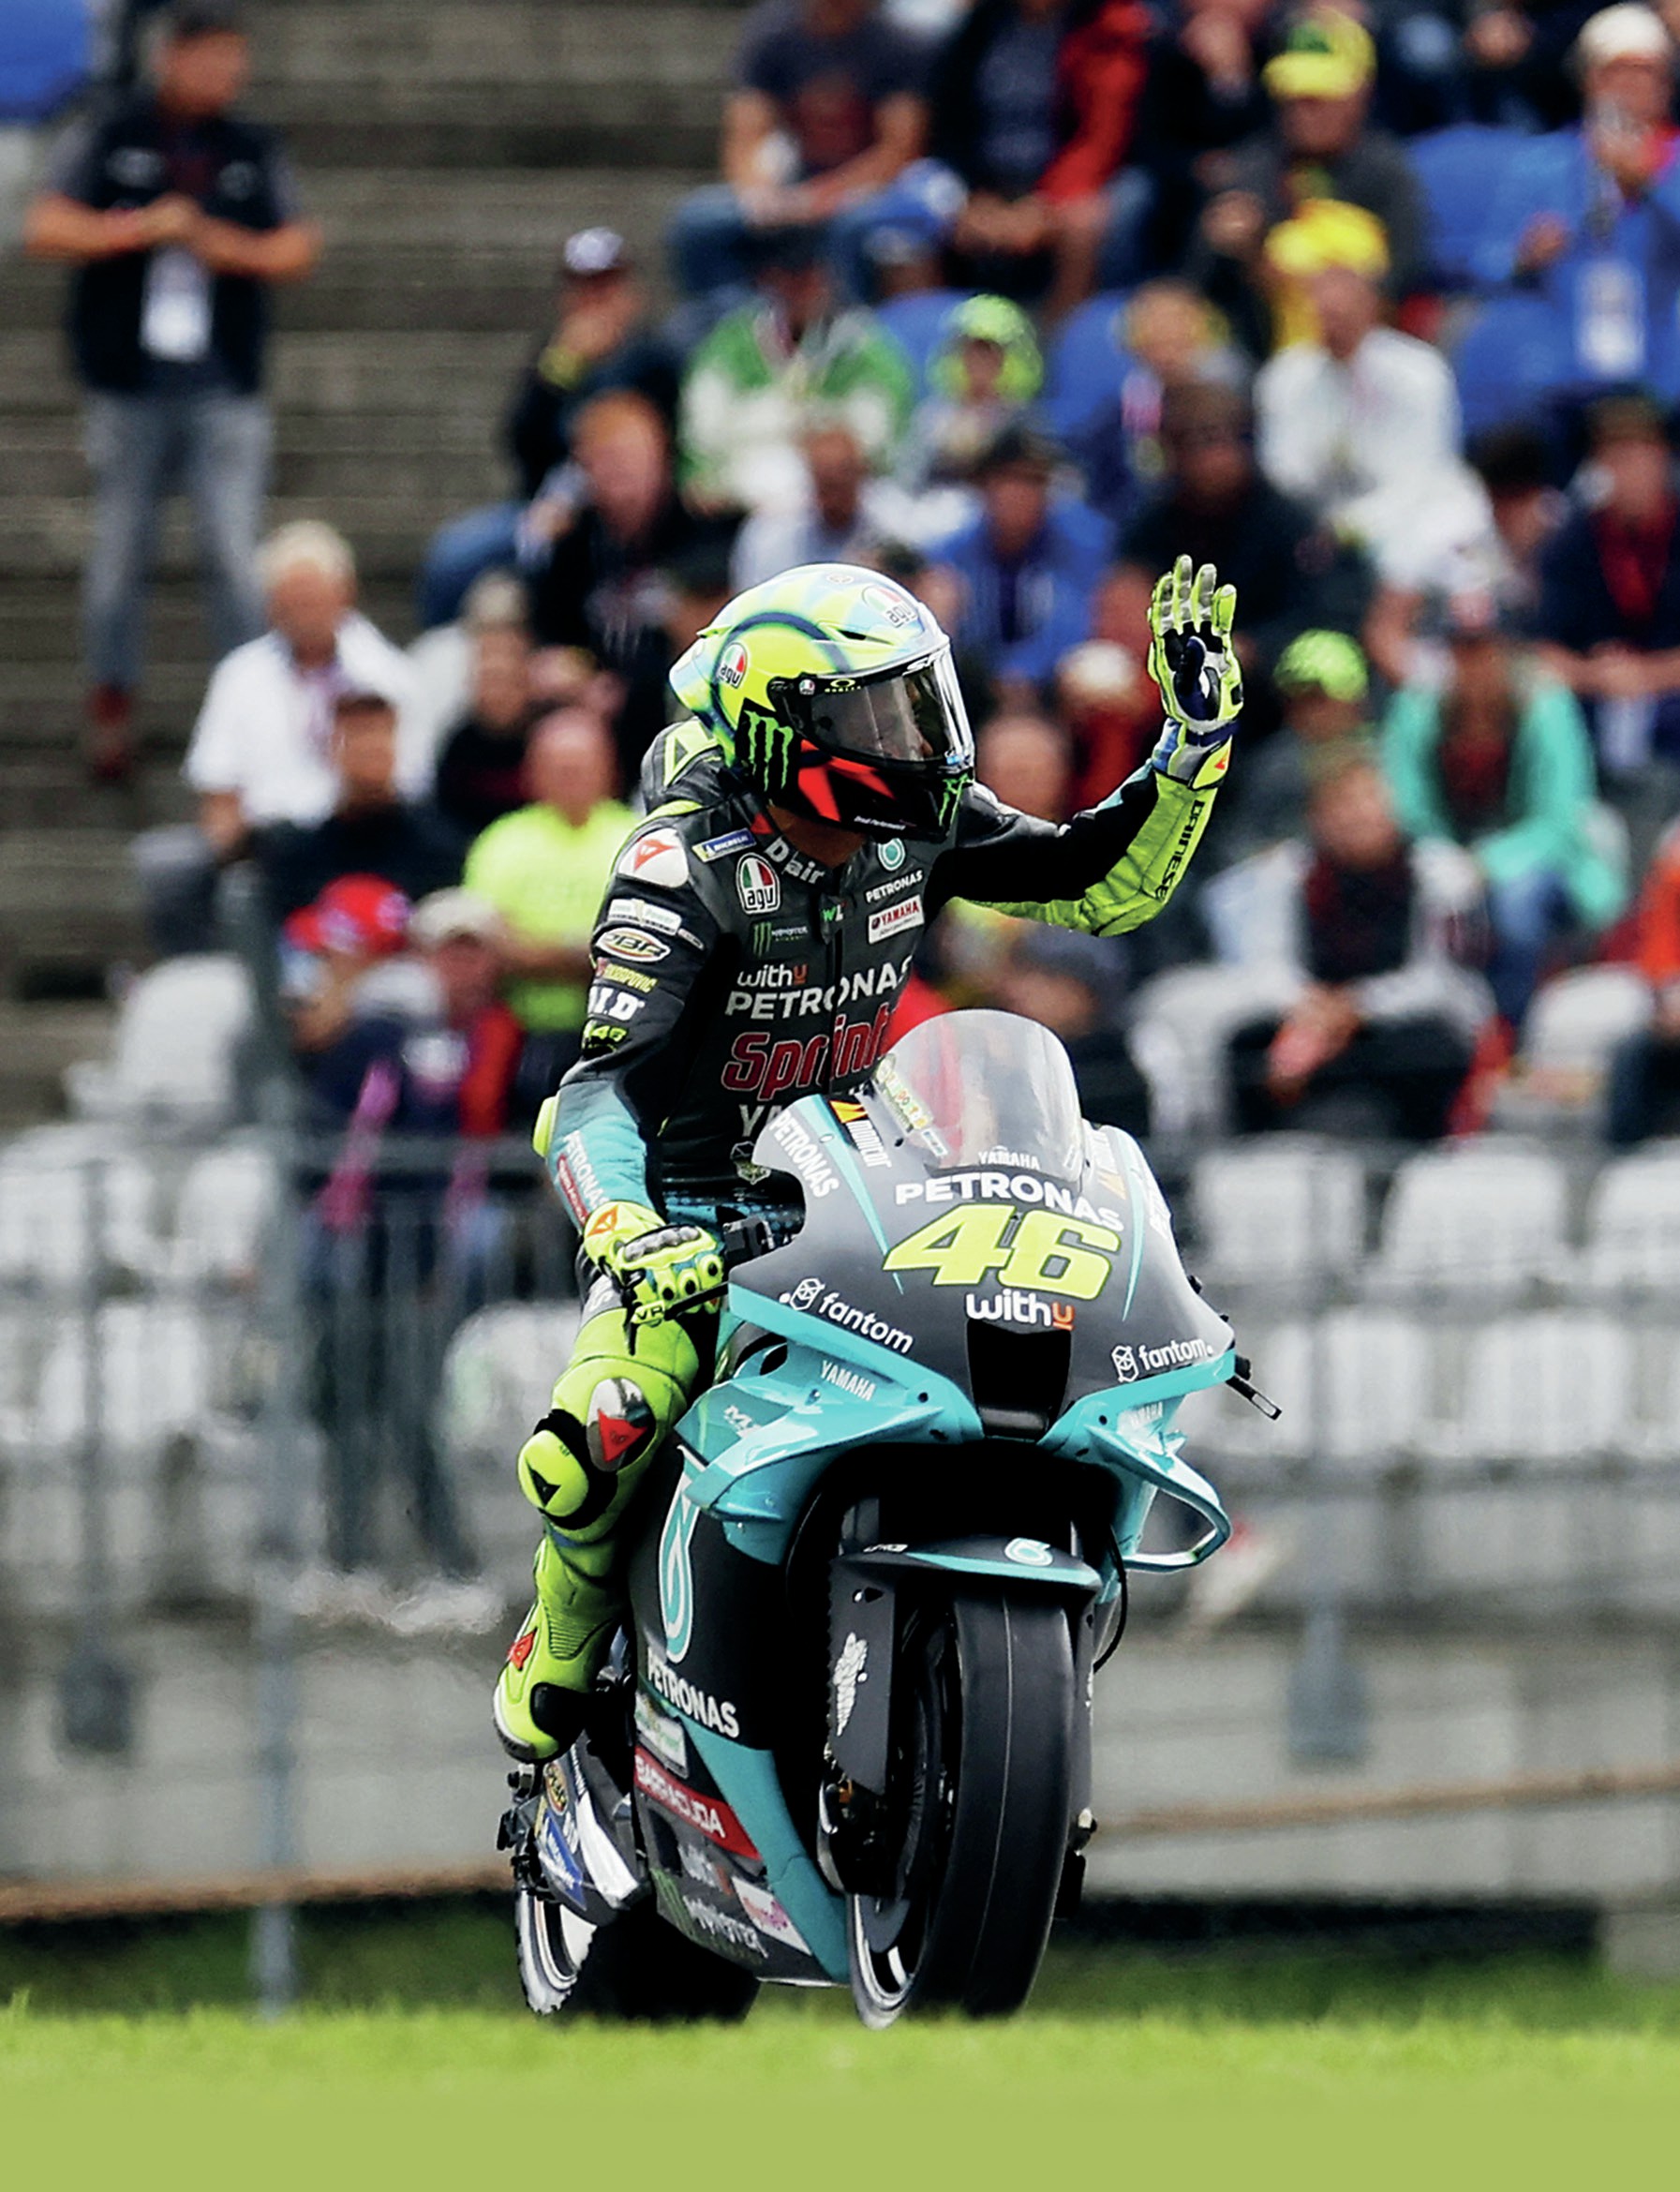 Valentino Rossi waving to fans while on his Yamaha supersport machine